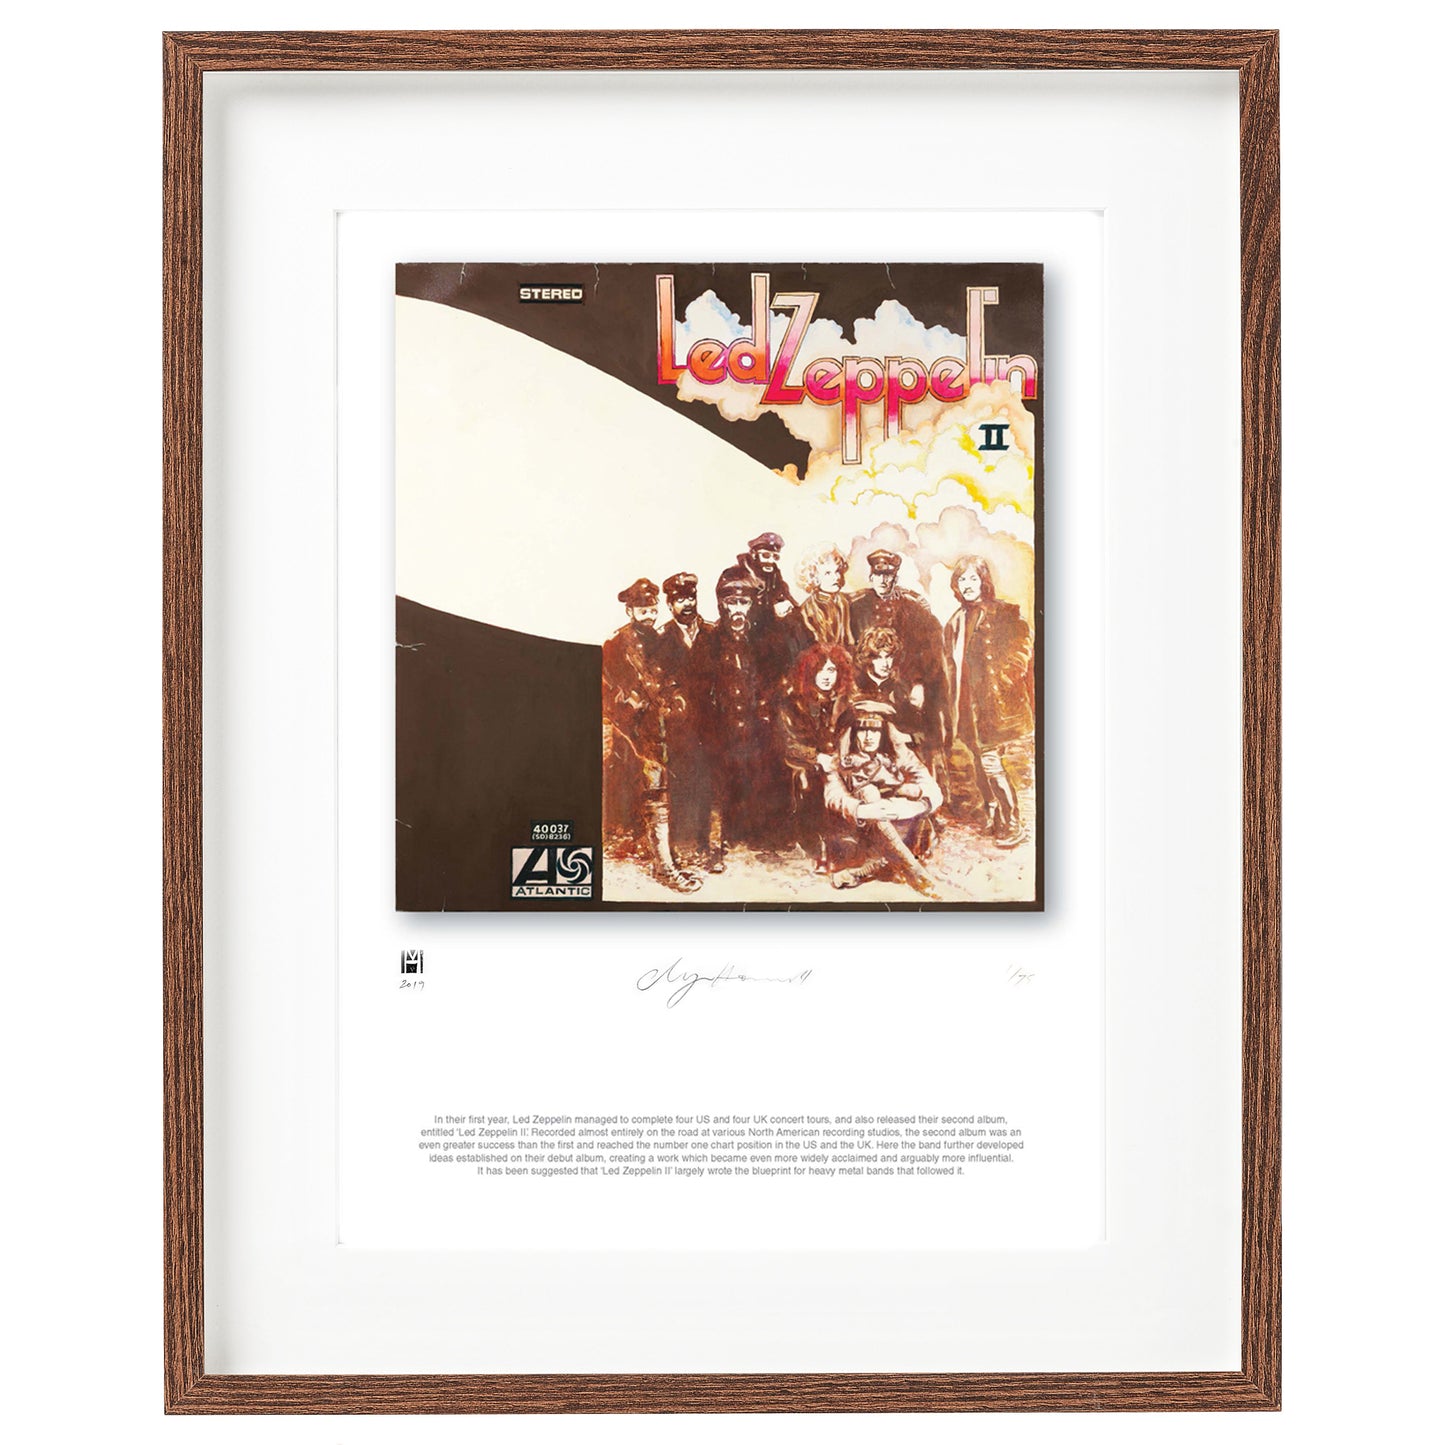 Led Zep II'' by Led Zeppelin Limited Edition Poster Prints of Original Painting